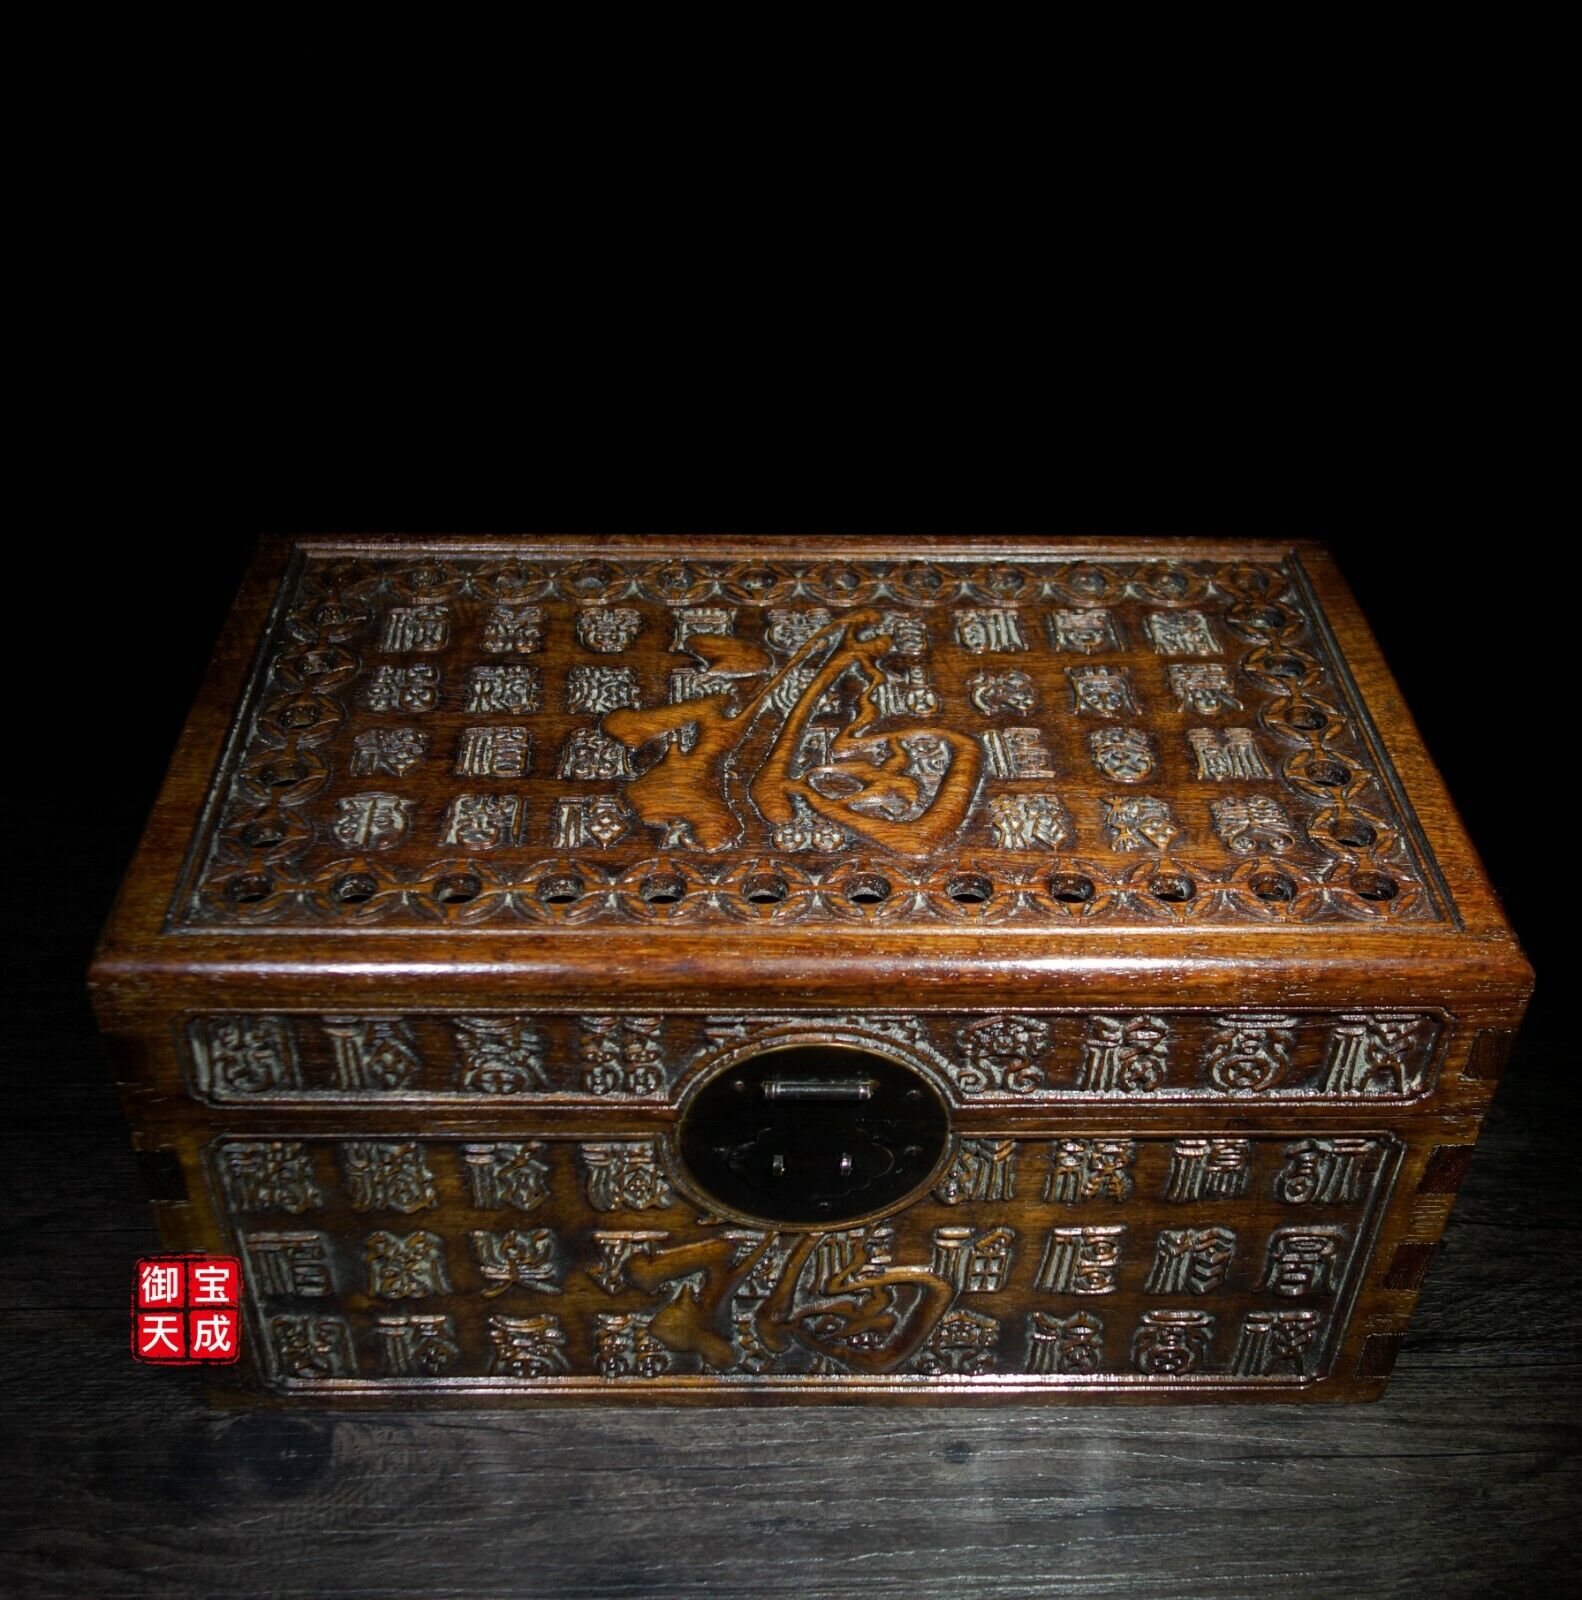 16 Old China Huanghuali Wood Carved Wealth FuZi Jewelry Box Storage boxes Statue